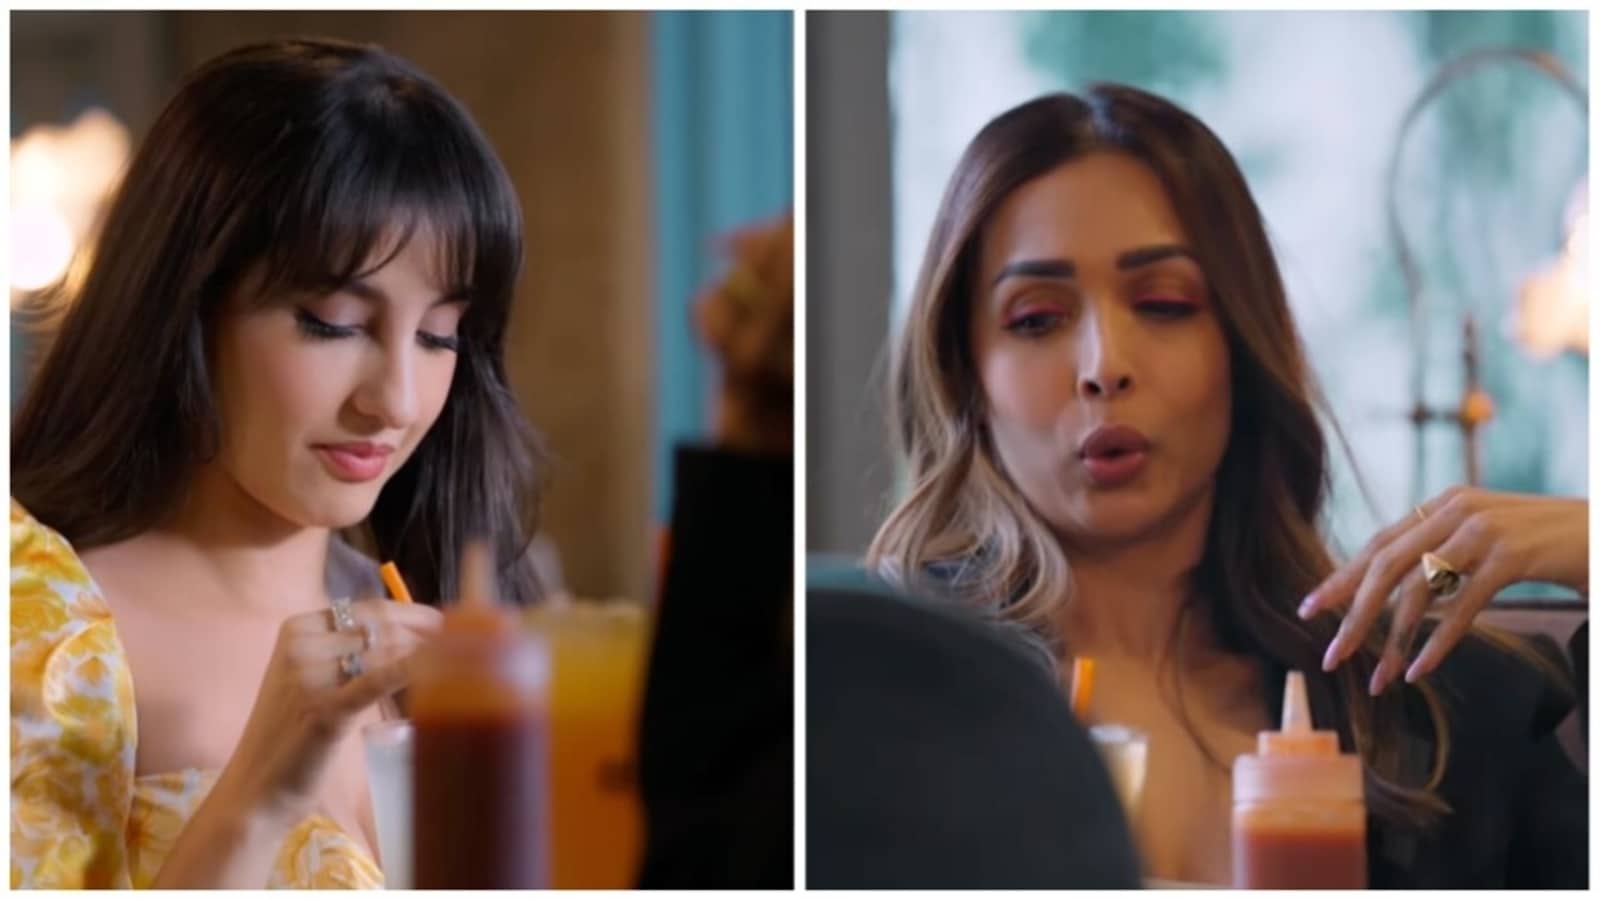 Nora Fatehi Upset With Malaika Arora Comparisons, Says 'It Is Disrespectful for Me'